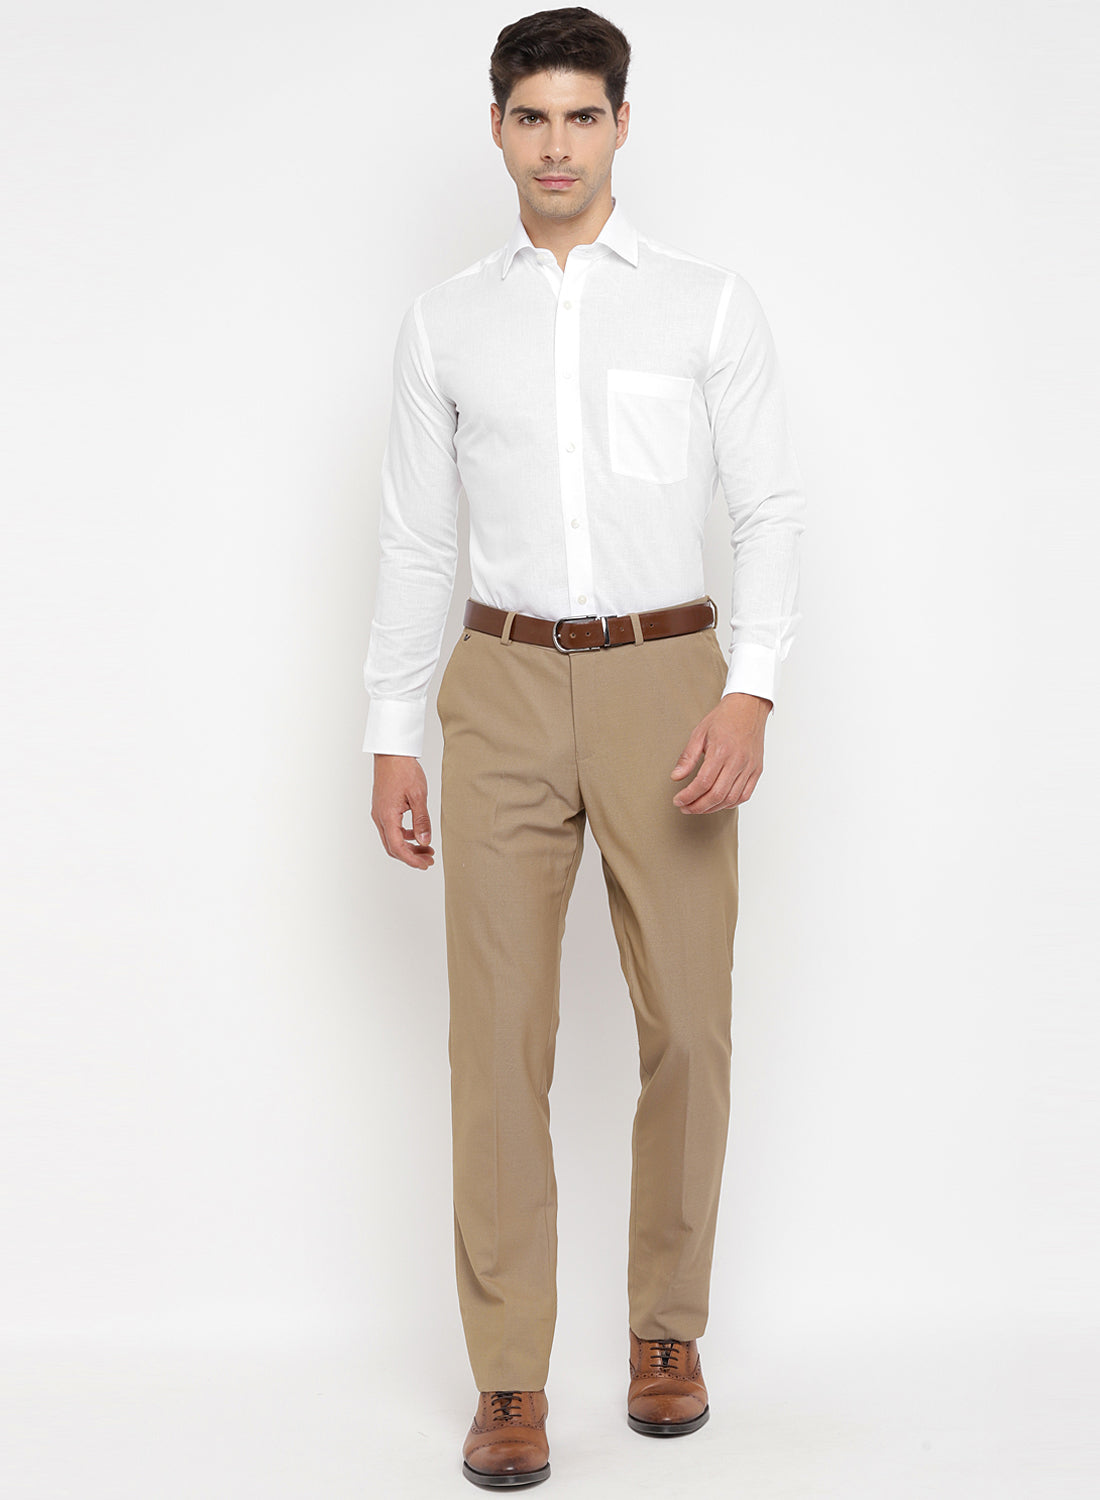 White Cotton Linen Solid Formal Shirt